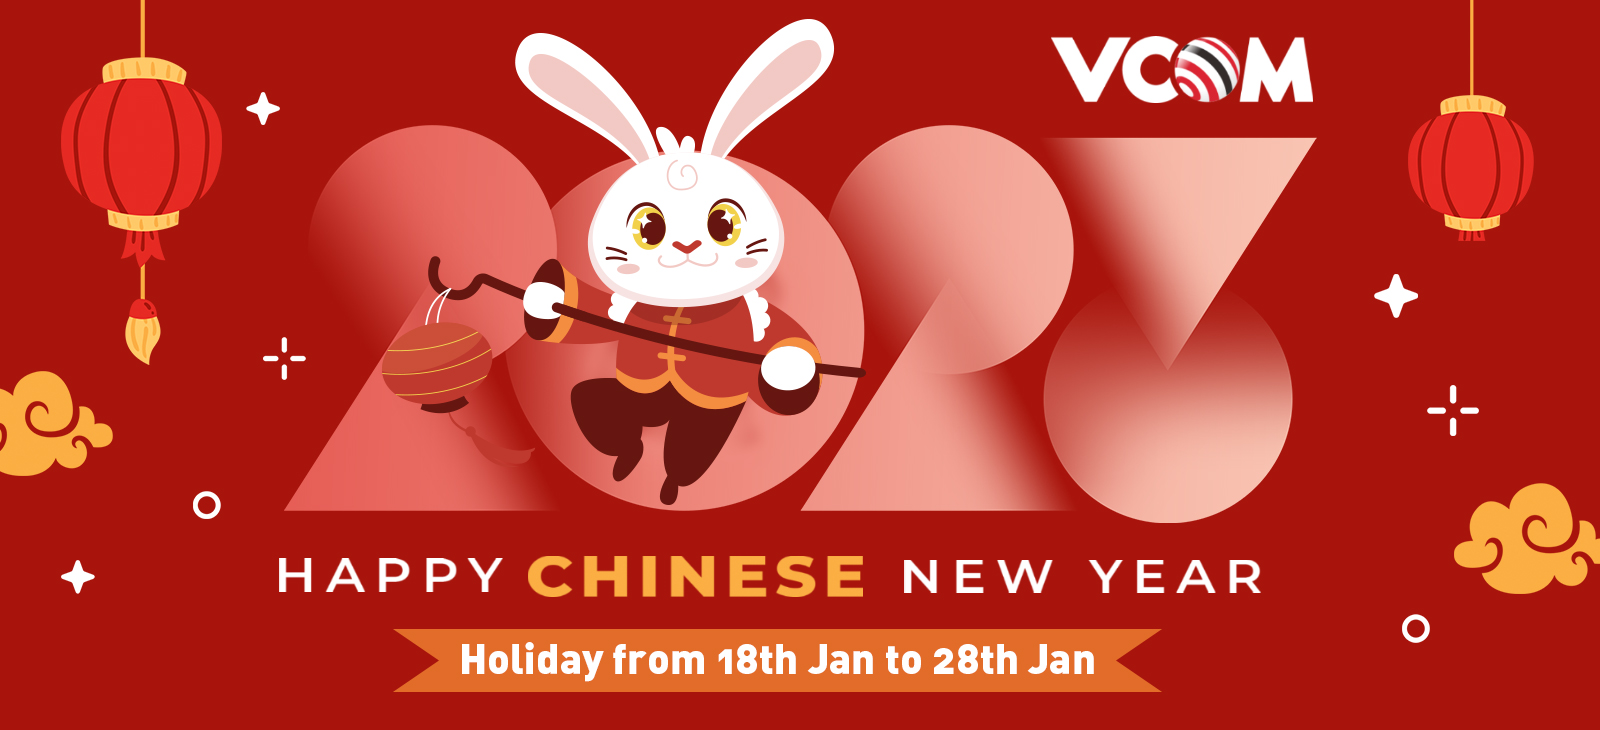 VCOM Holiday Notice For Chinese New Year